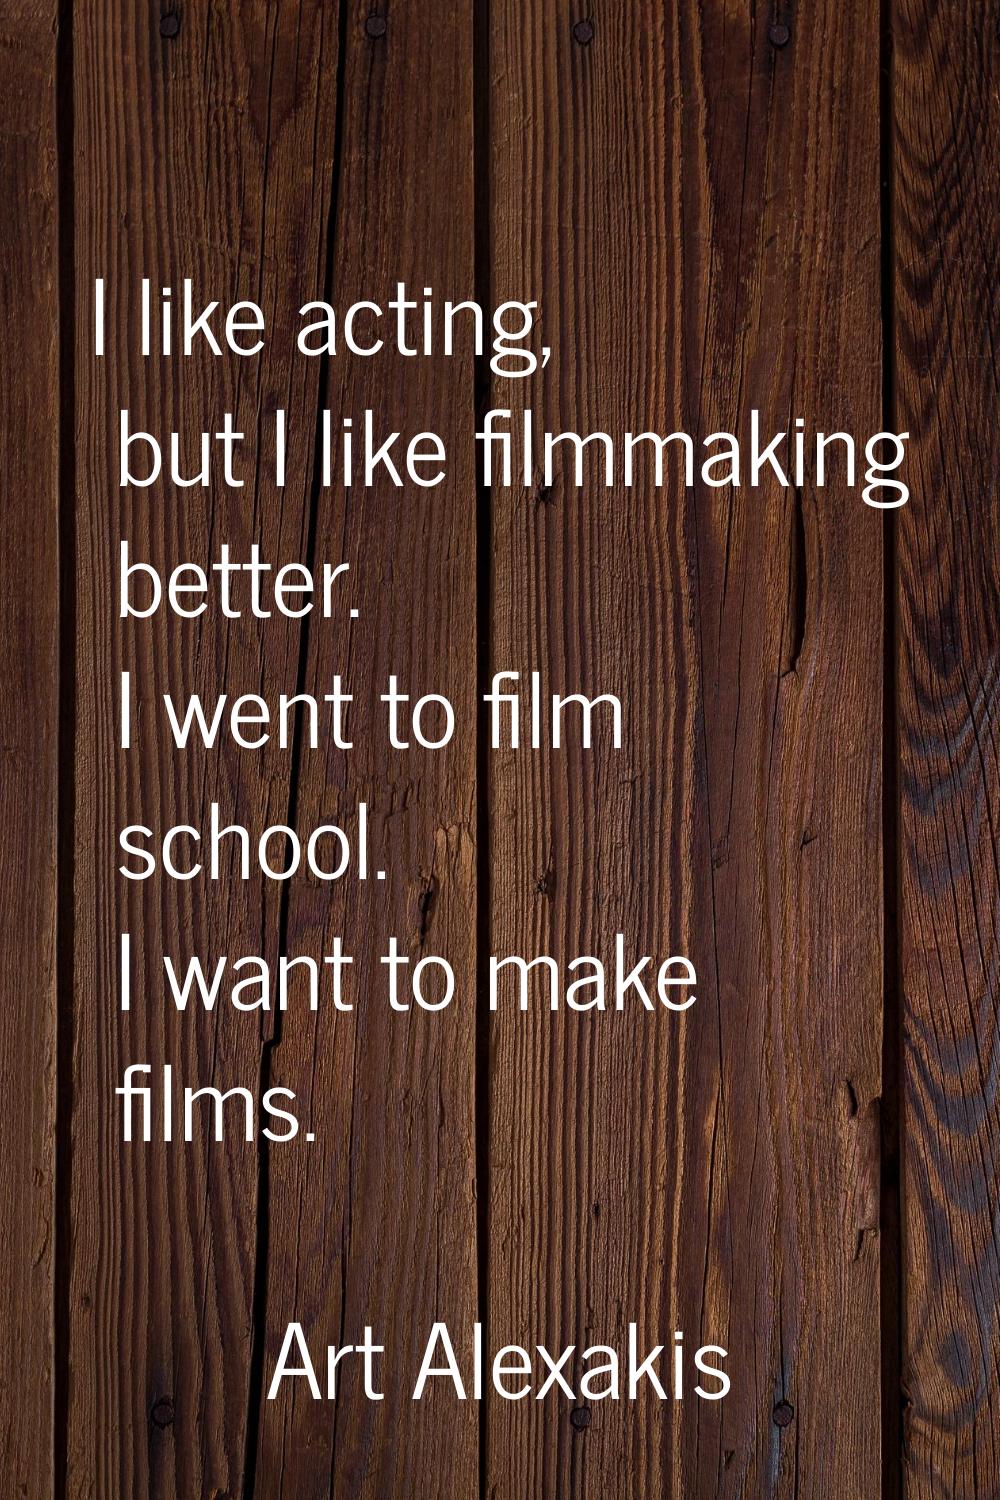 I like acting, but I like filmmaking better. I went to film school. I want to make films.